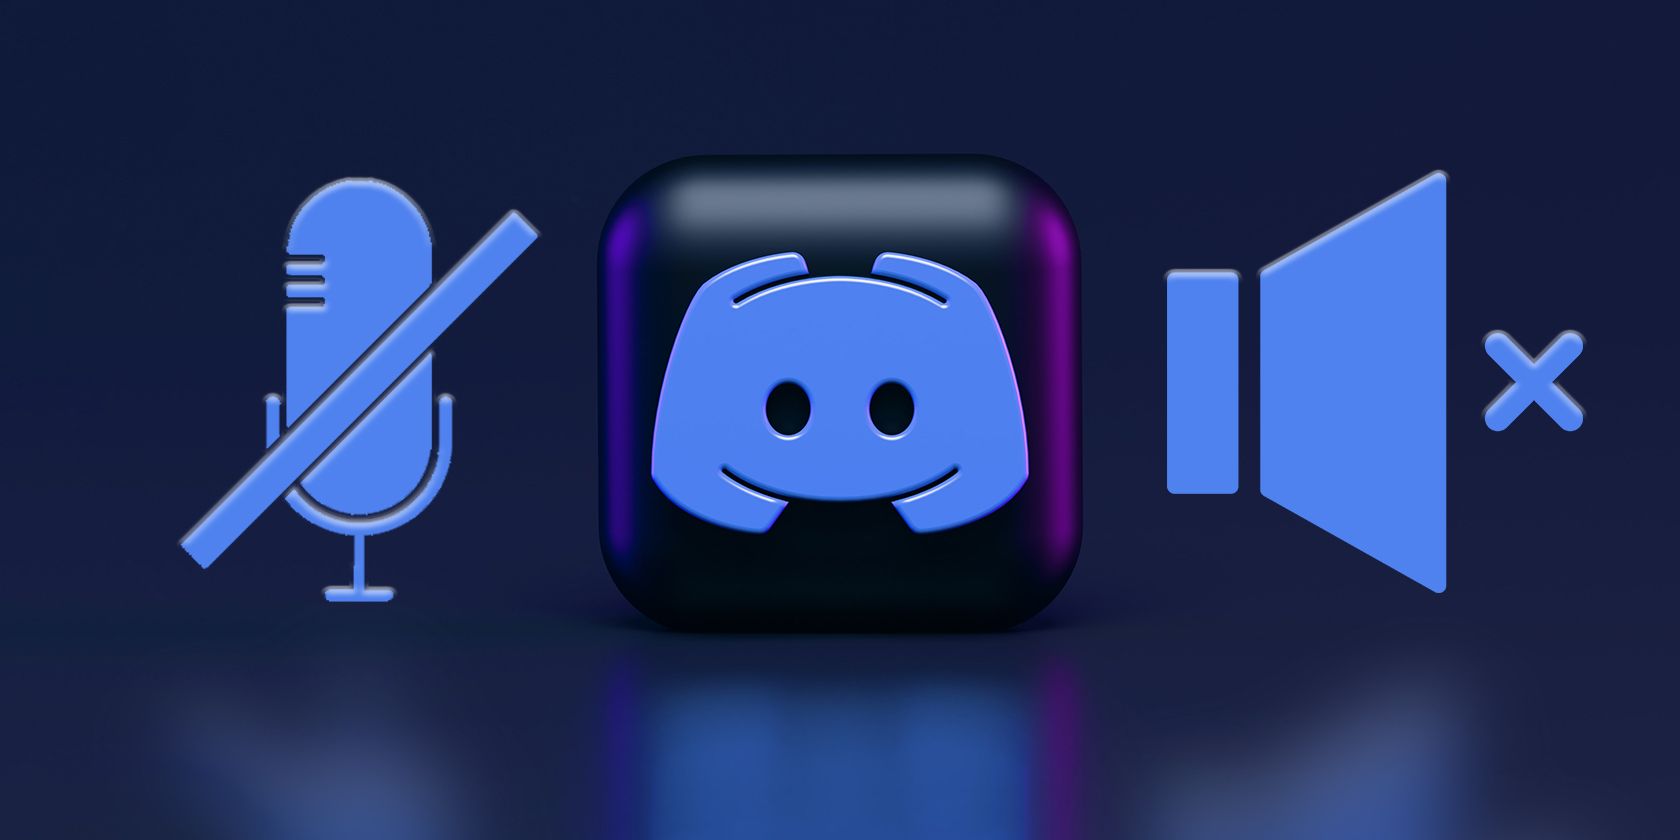 Mute and silent icons beside the Discord logo